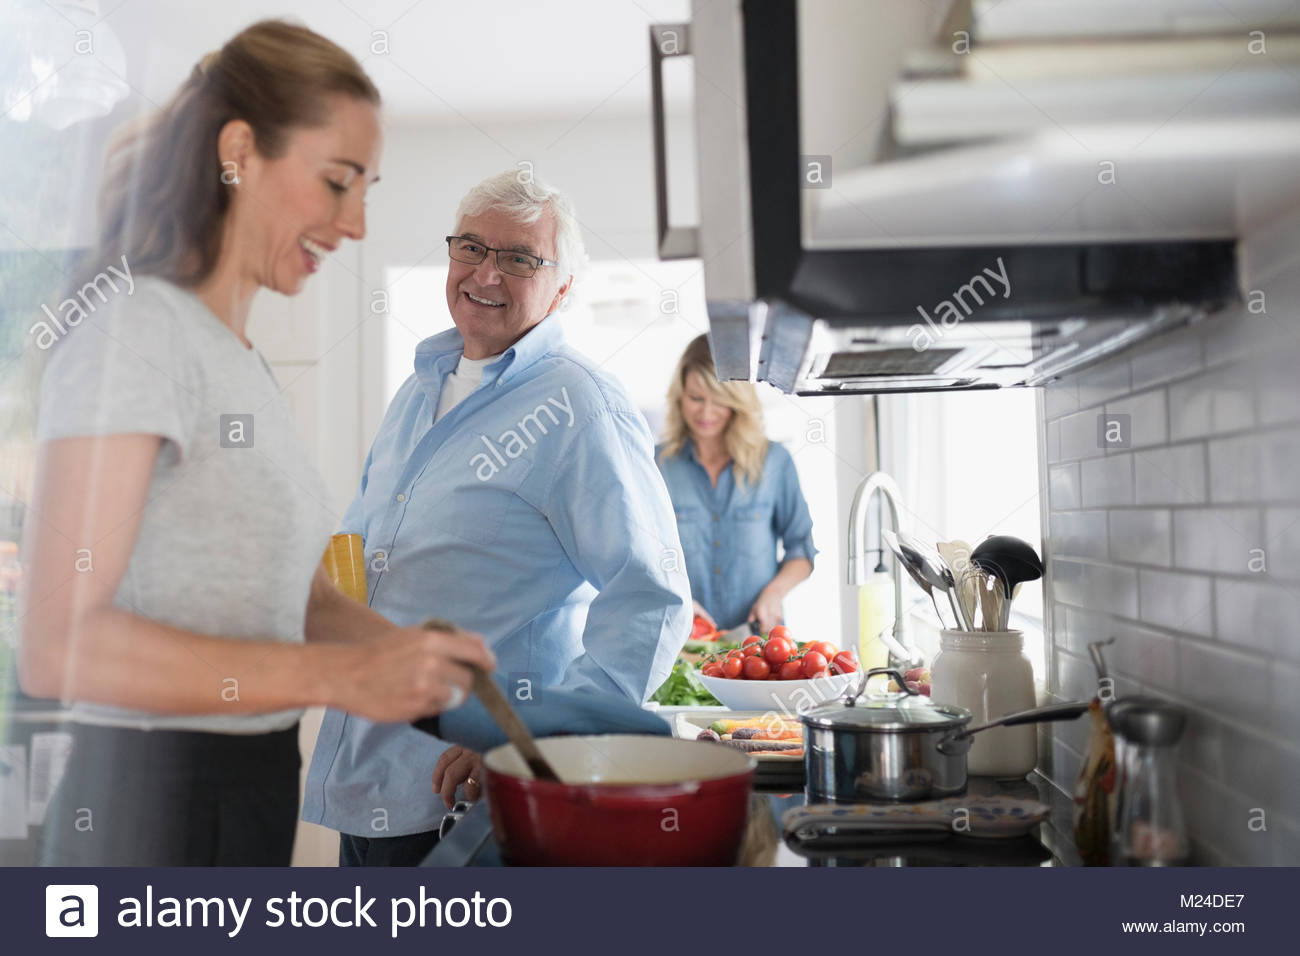 Smiling daughter and senior father cooking at stove in kitchen Stock Photo